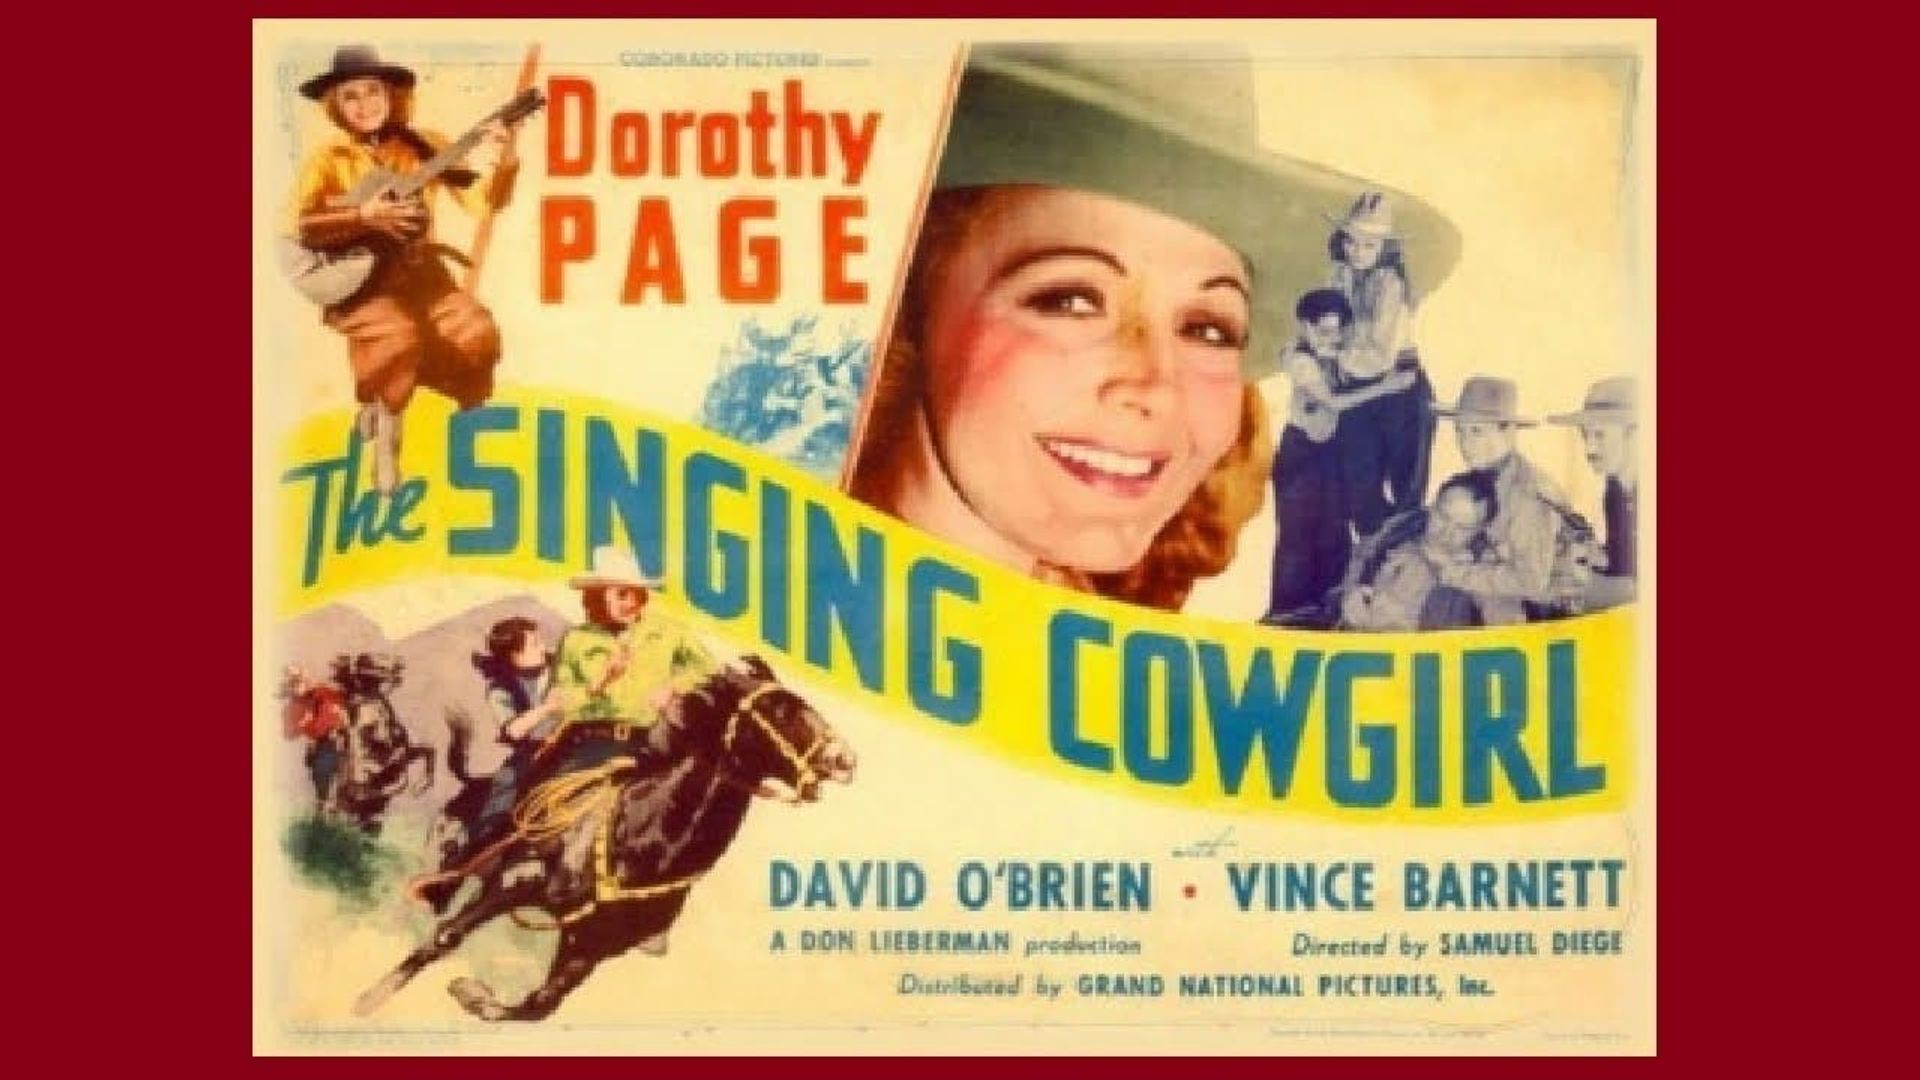 The Singing Cowgirl background